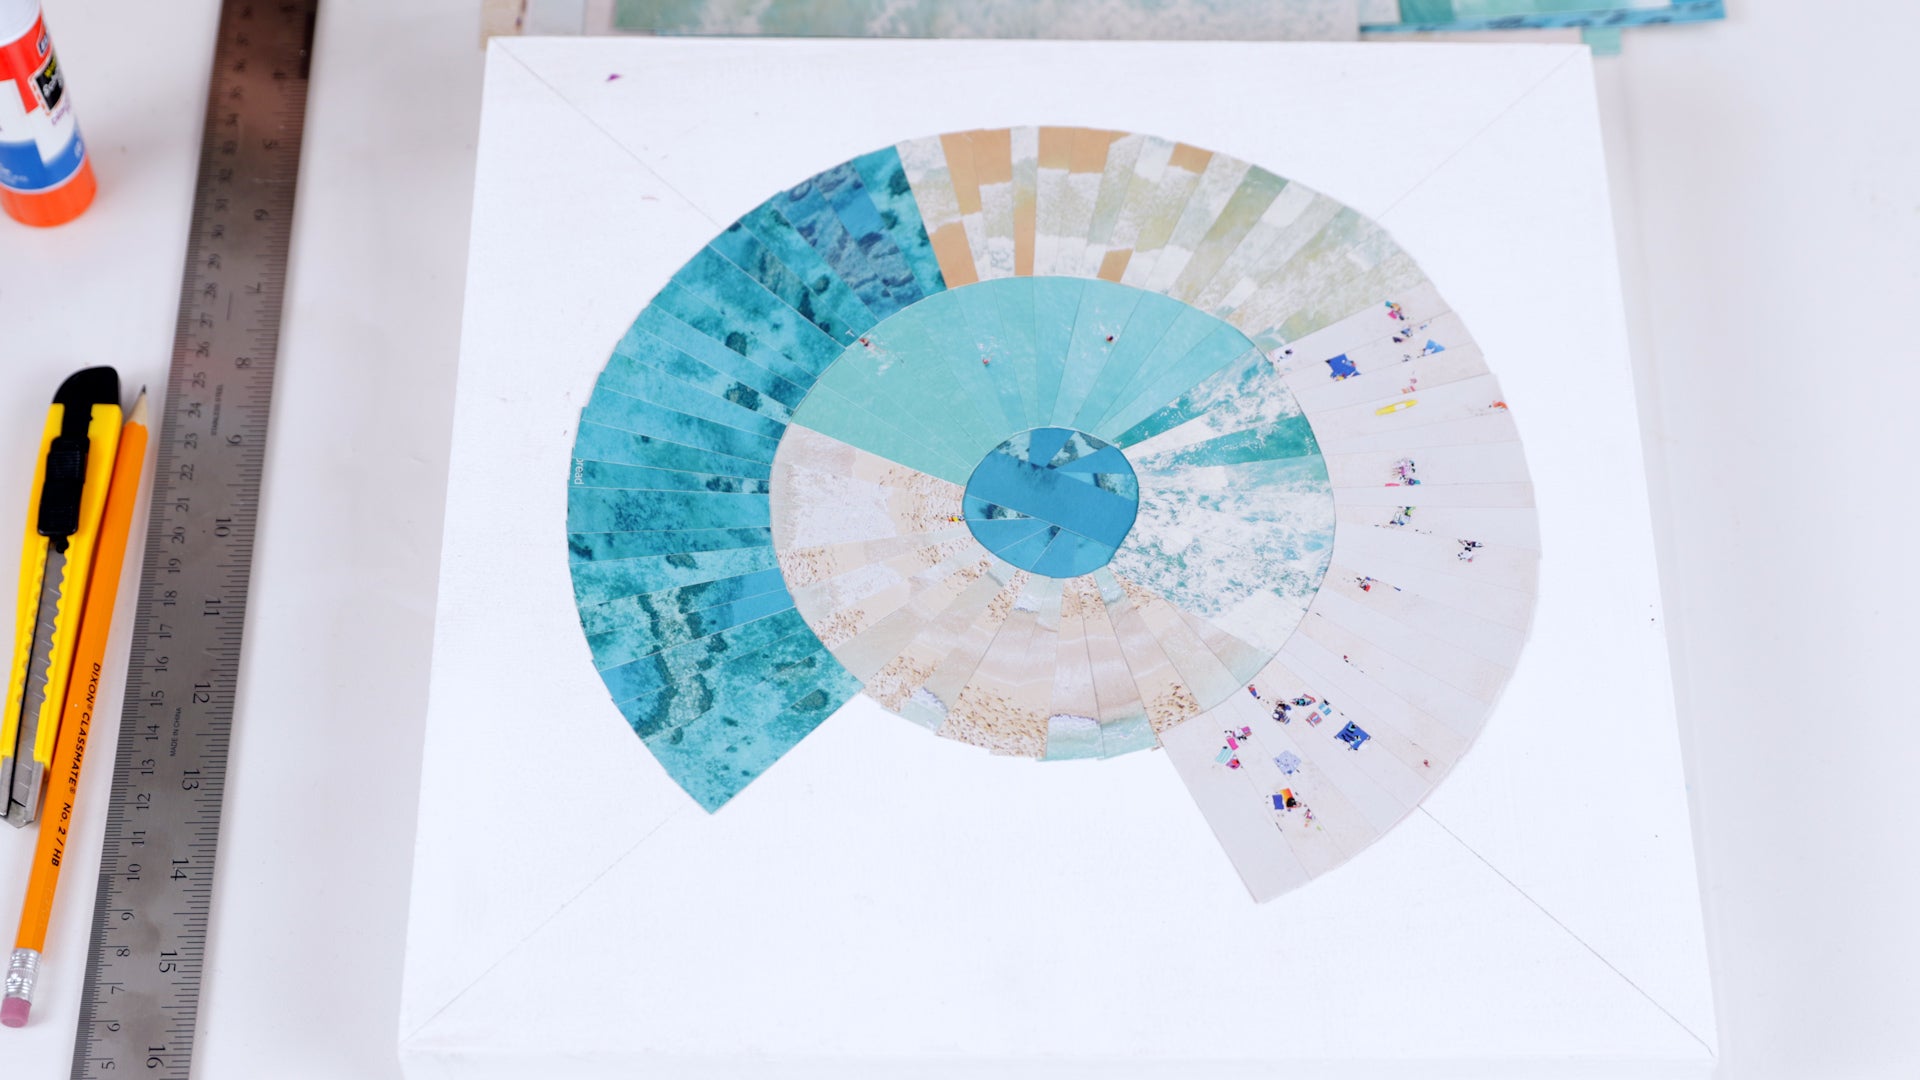 how to resin a paper collage: break up the pattern by mixing up the orientation as you lay down each strip